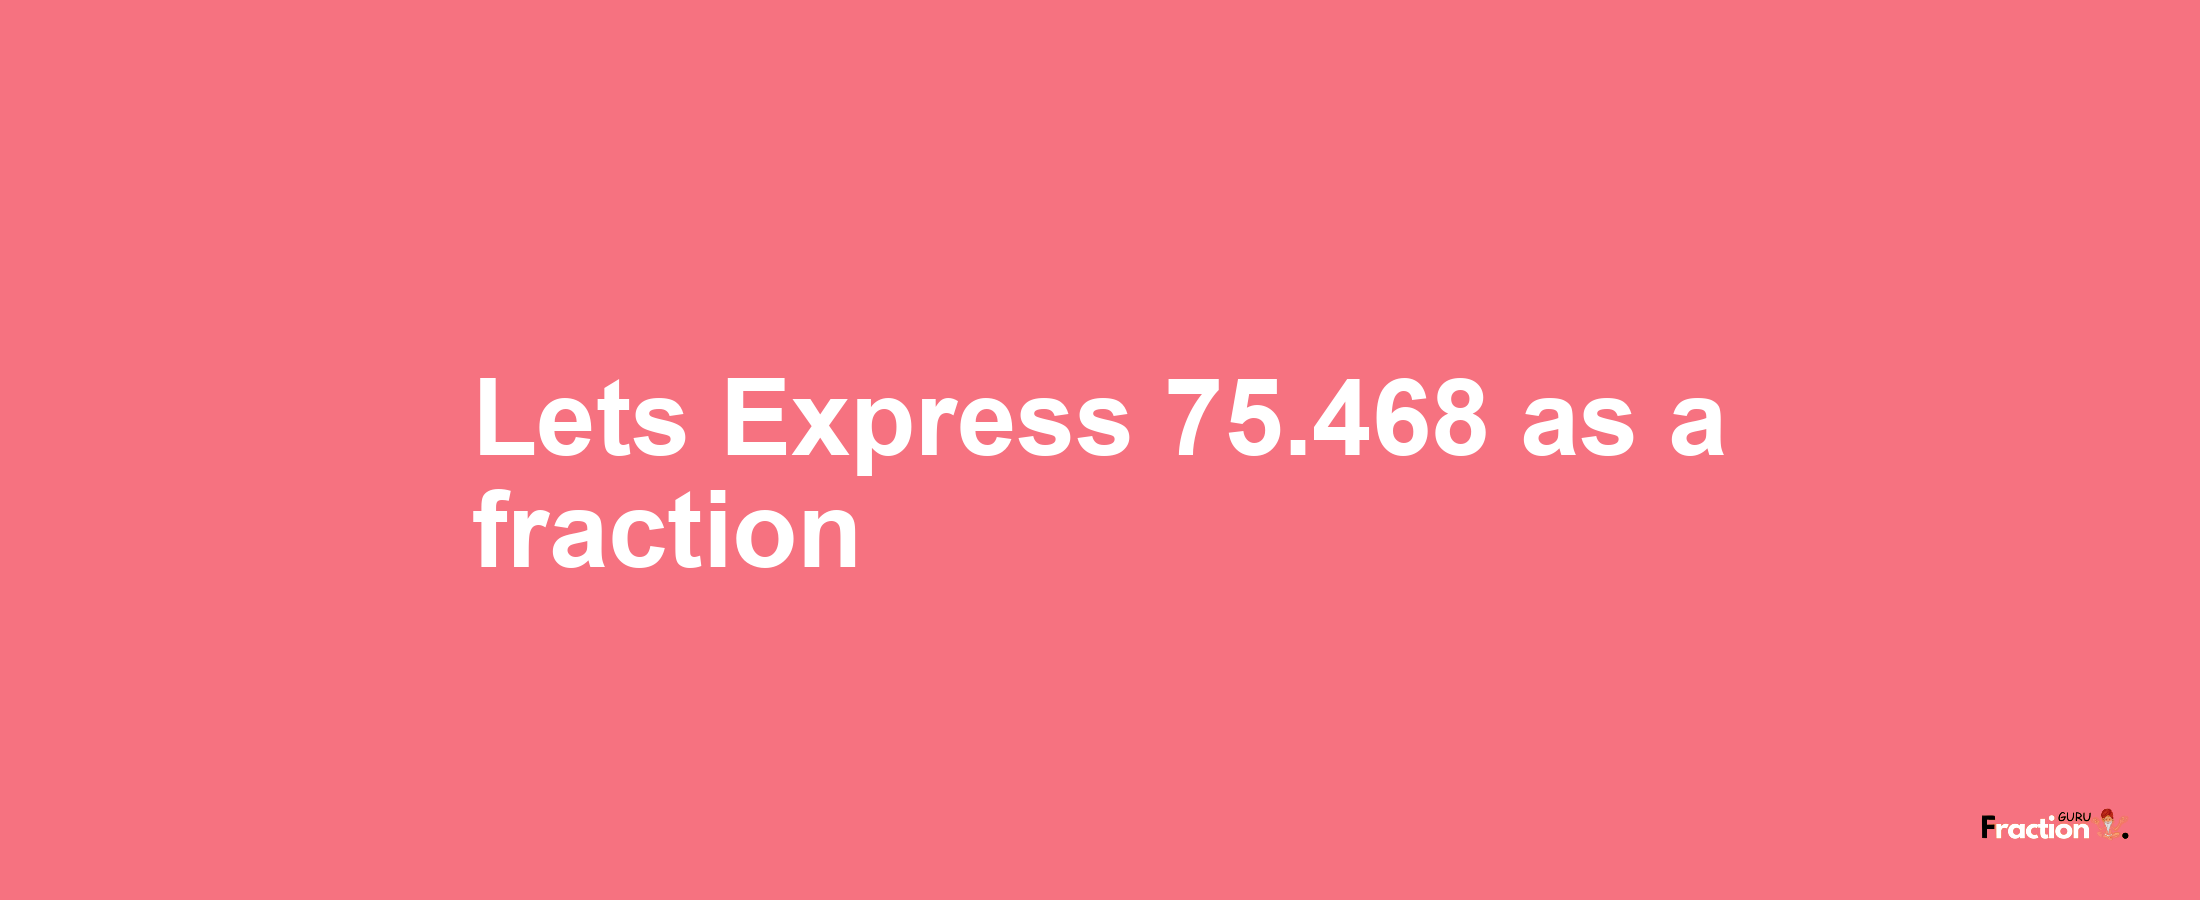 Lets Express 75.468 as afraction